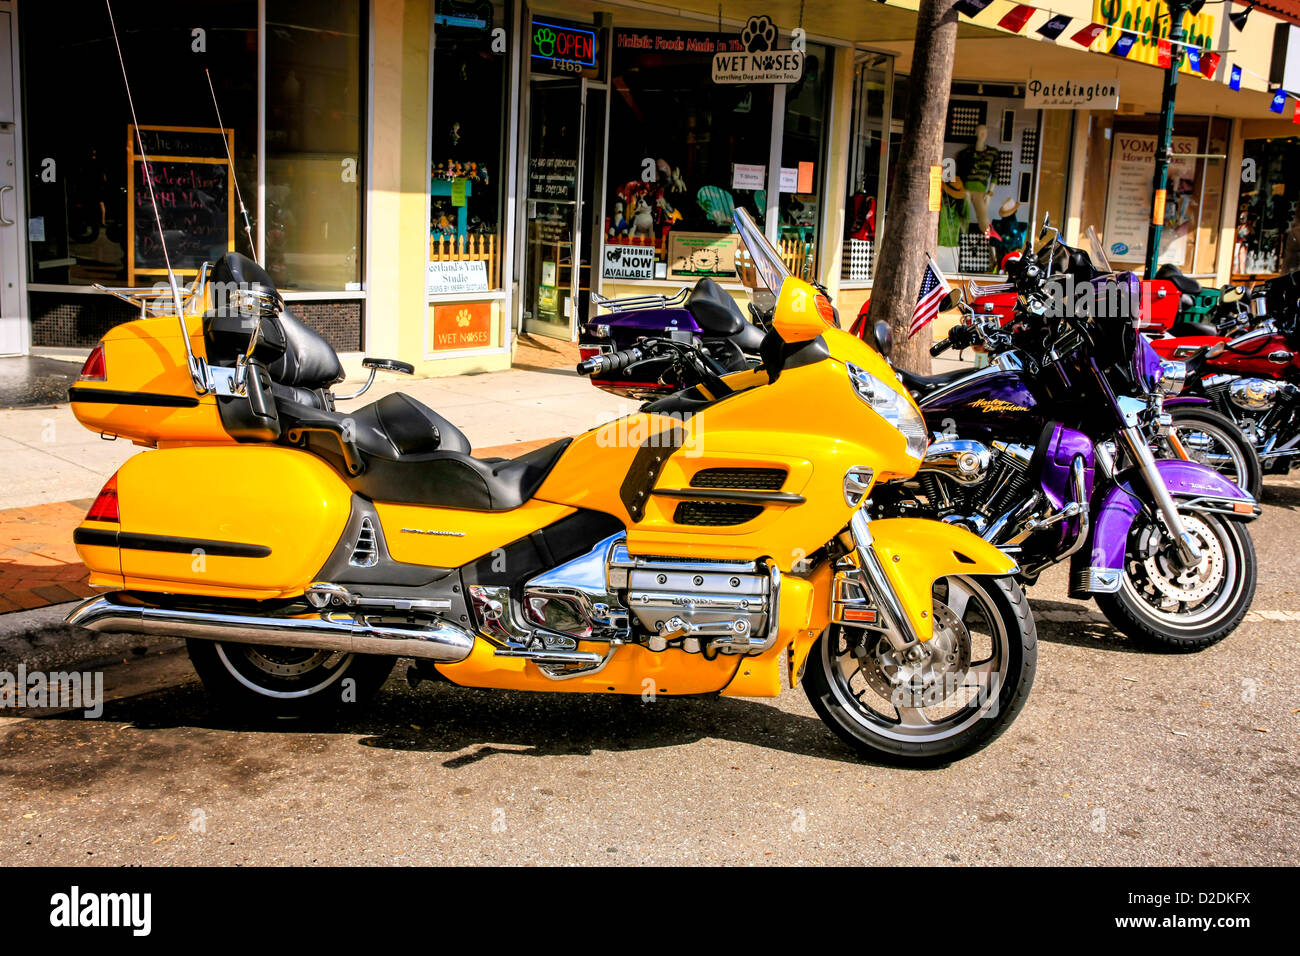 Yellow Honda Gold-wing amongst the Harley's at the Thunder in the Bay motorcycle event in Sarasota Florida Stock Photo